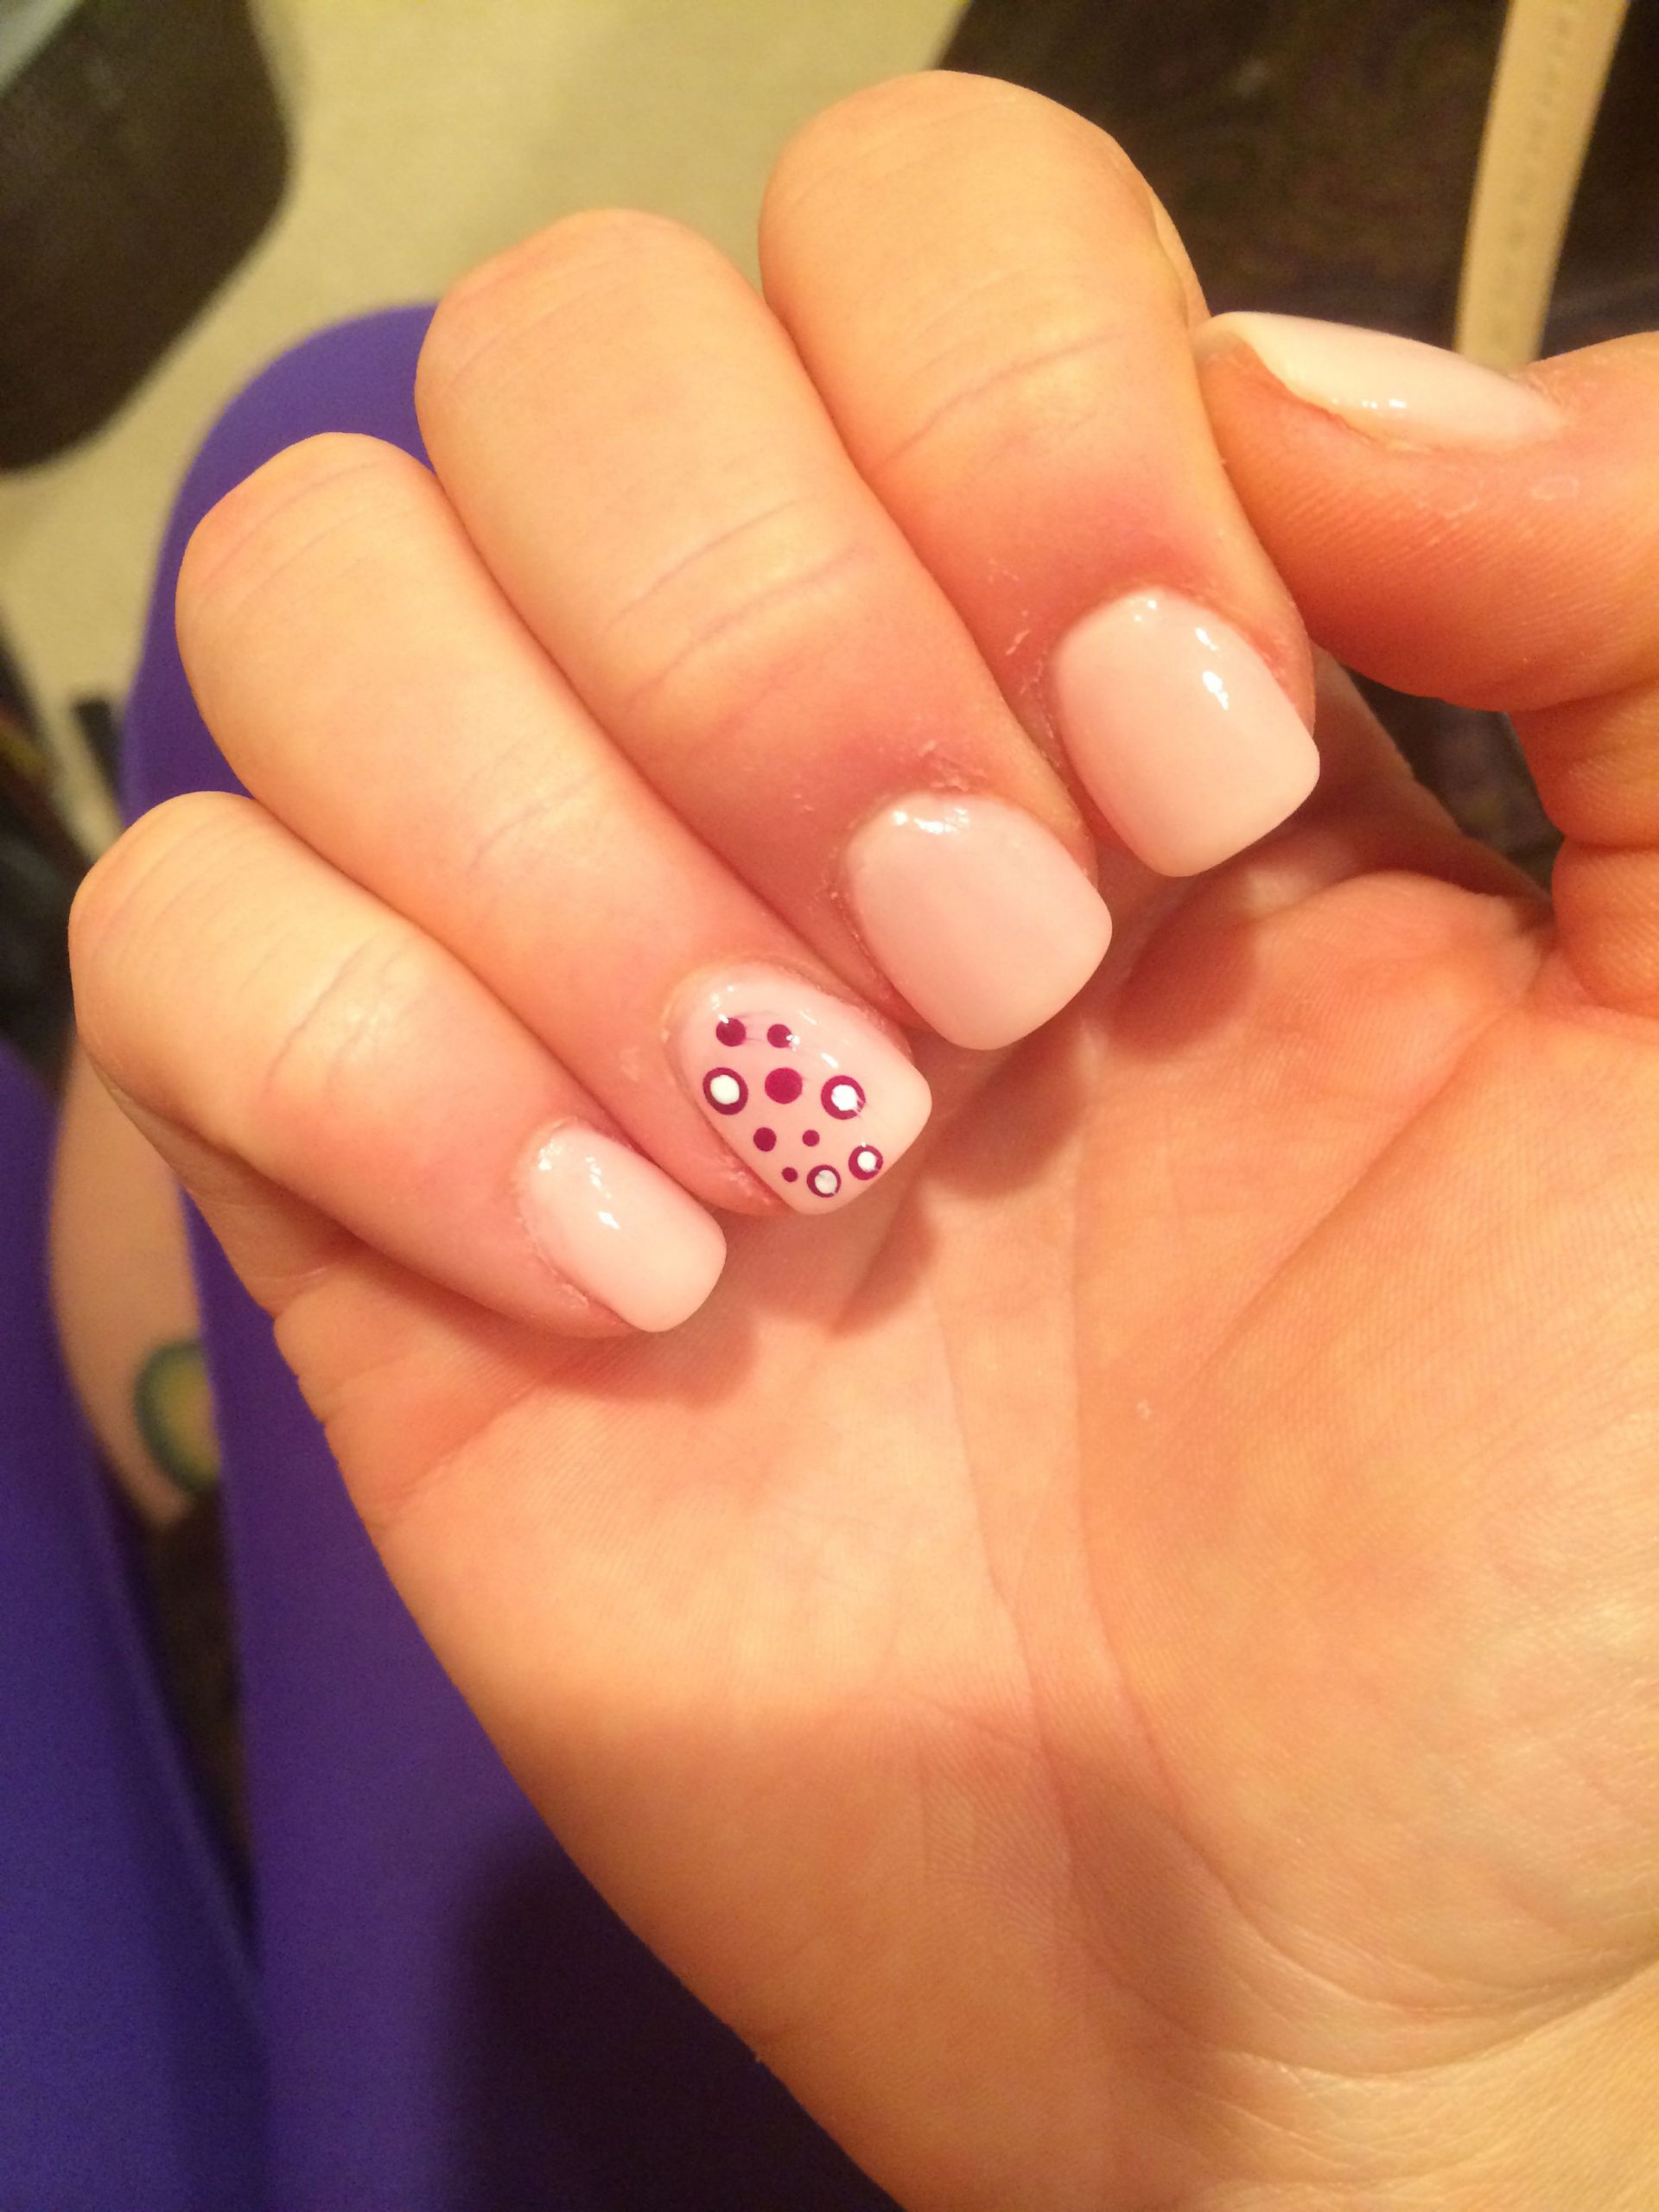 Pretty Spa Nails
 Pale pink with pretty dots spa nails II Carmel Indiana